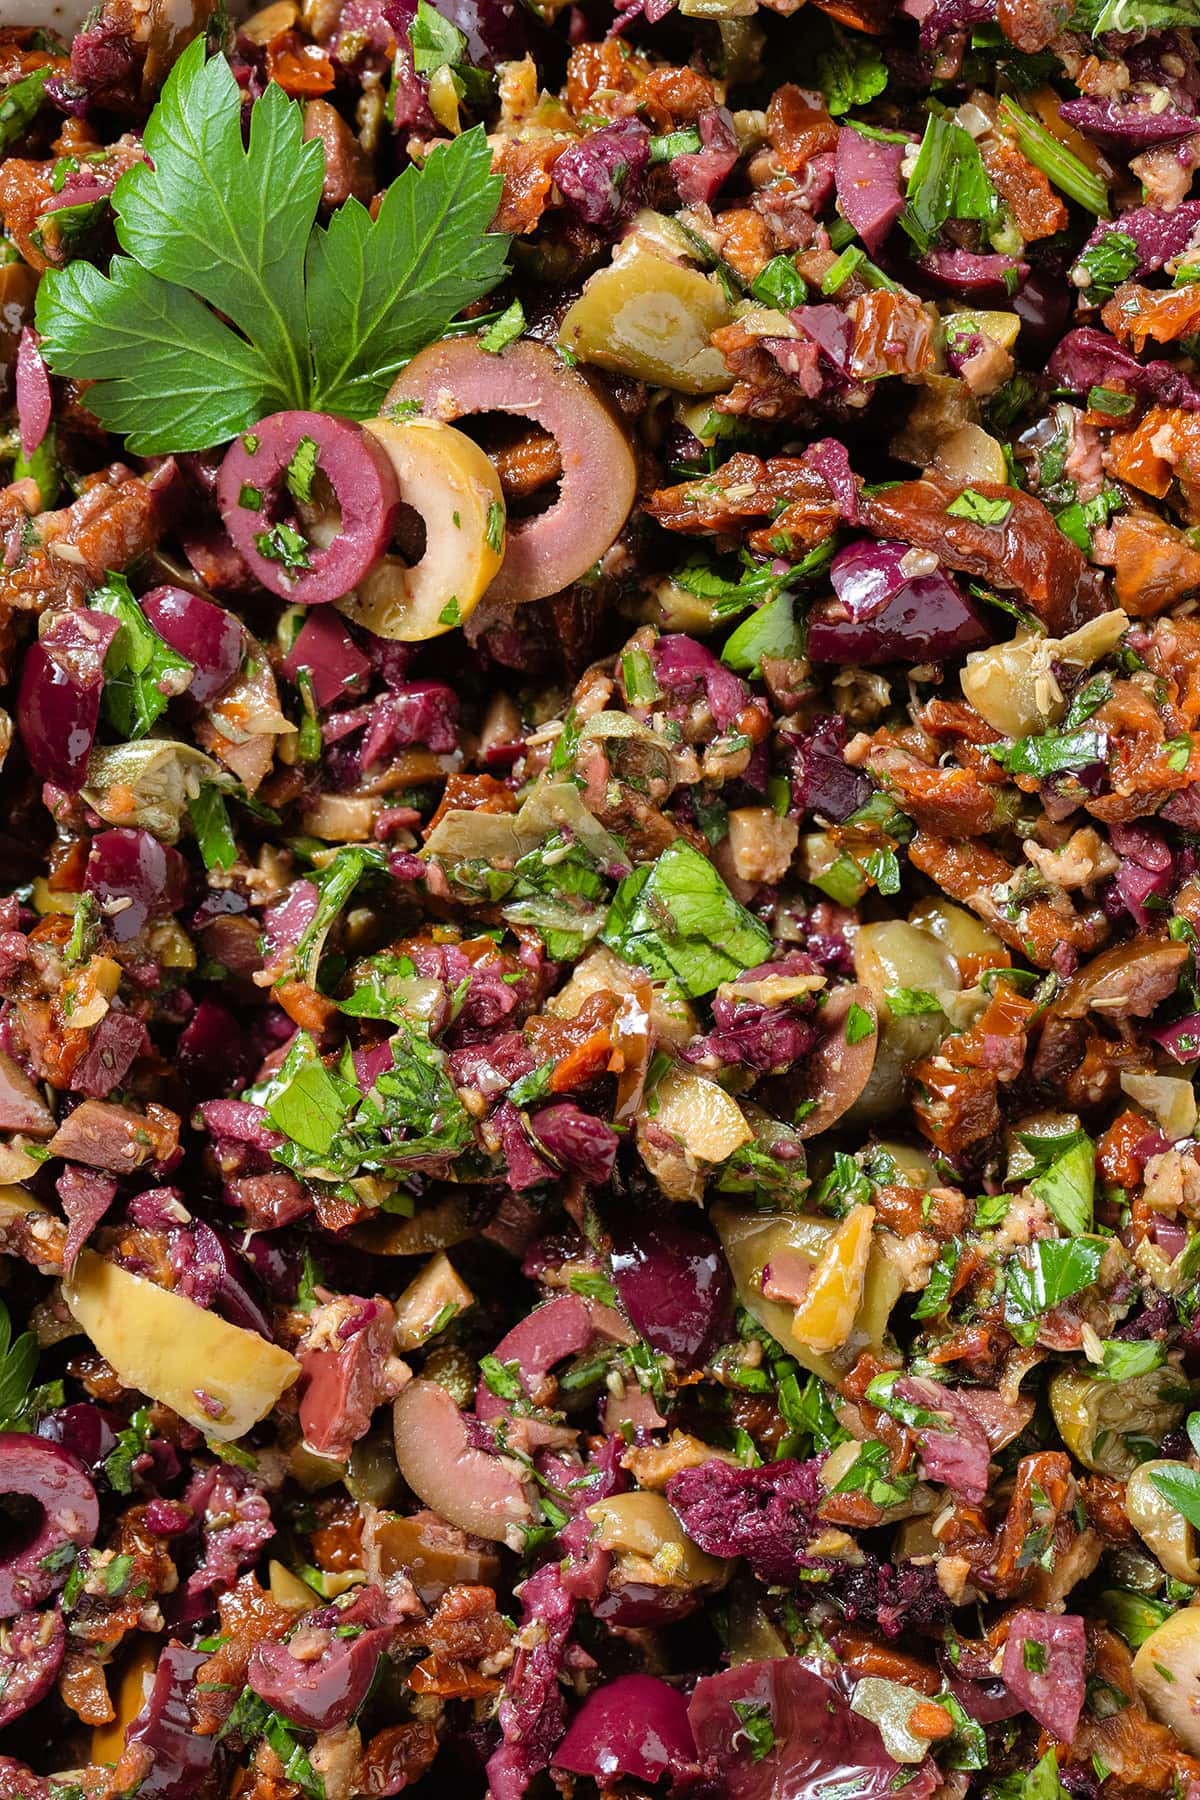 Olive tapenade with sundried tomatoes garnished with fresh parsley and olive slices.